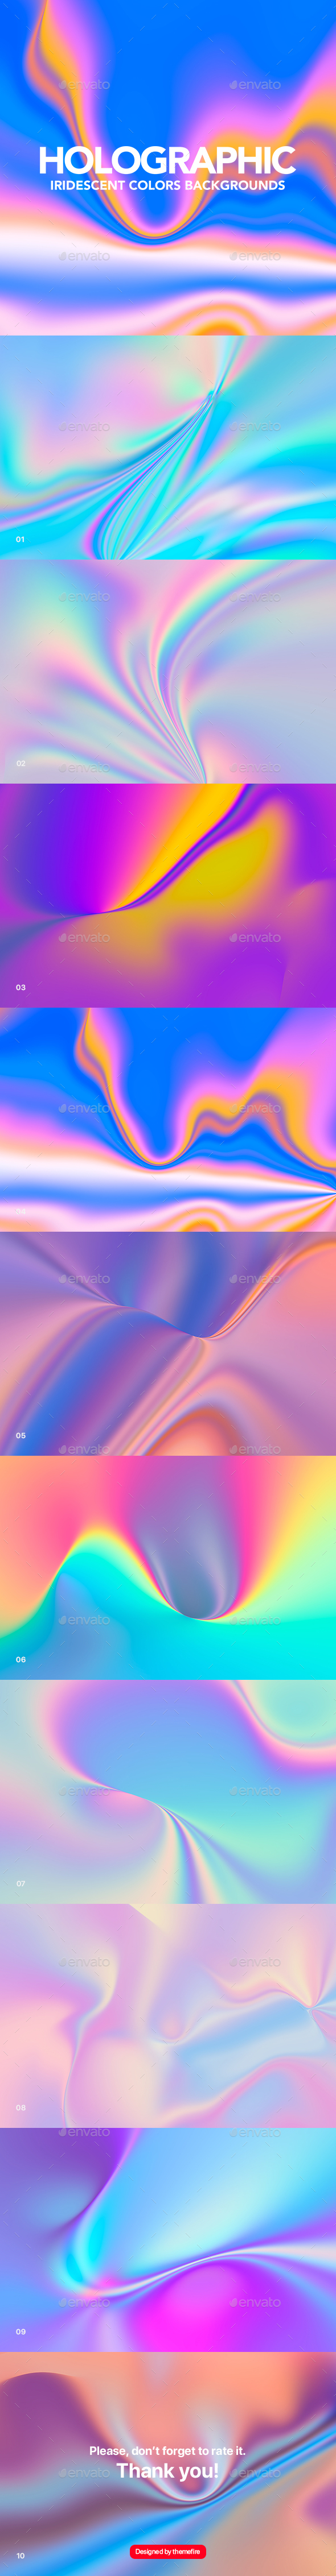 Neon Holographic Abstract Background Set